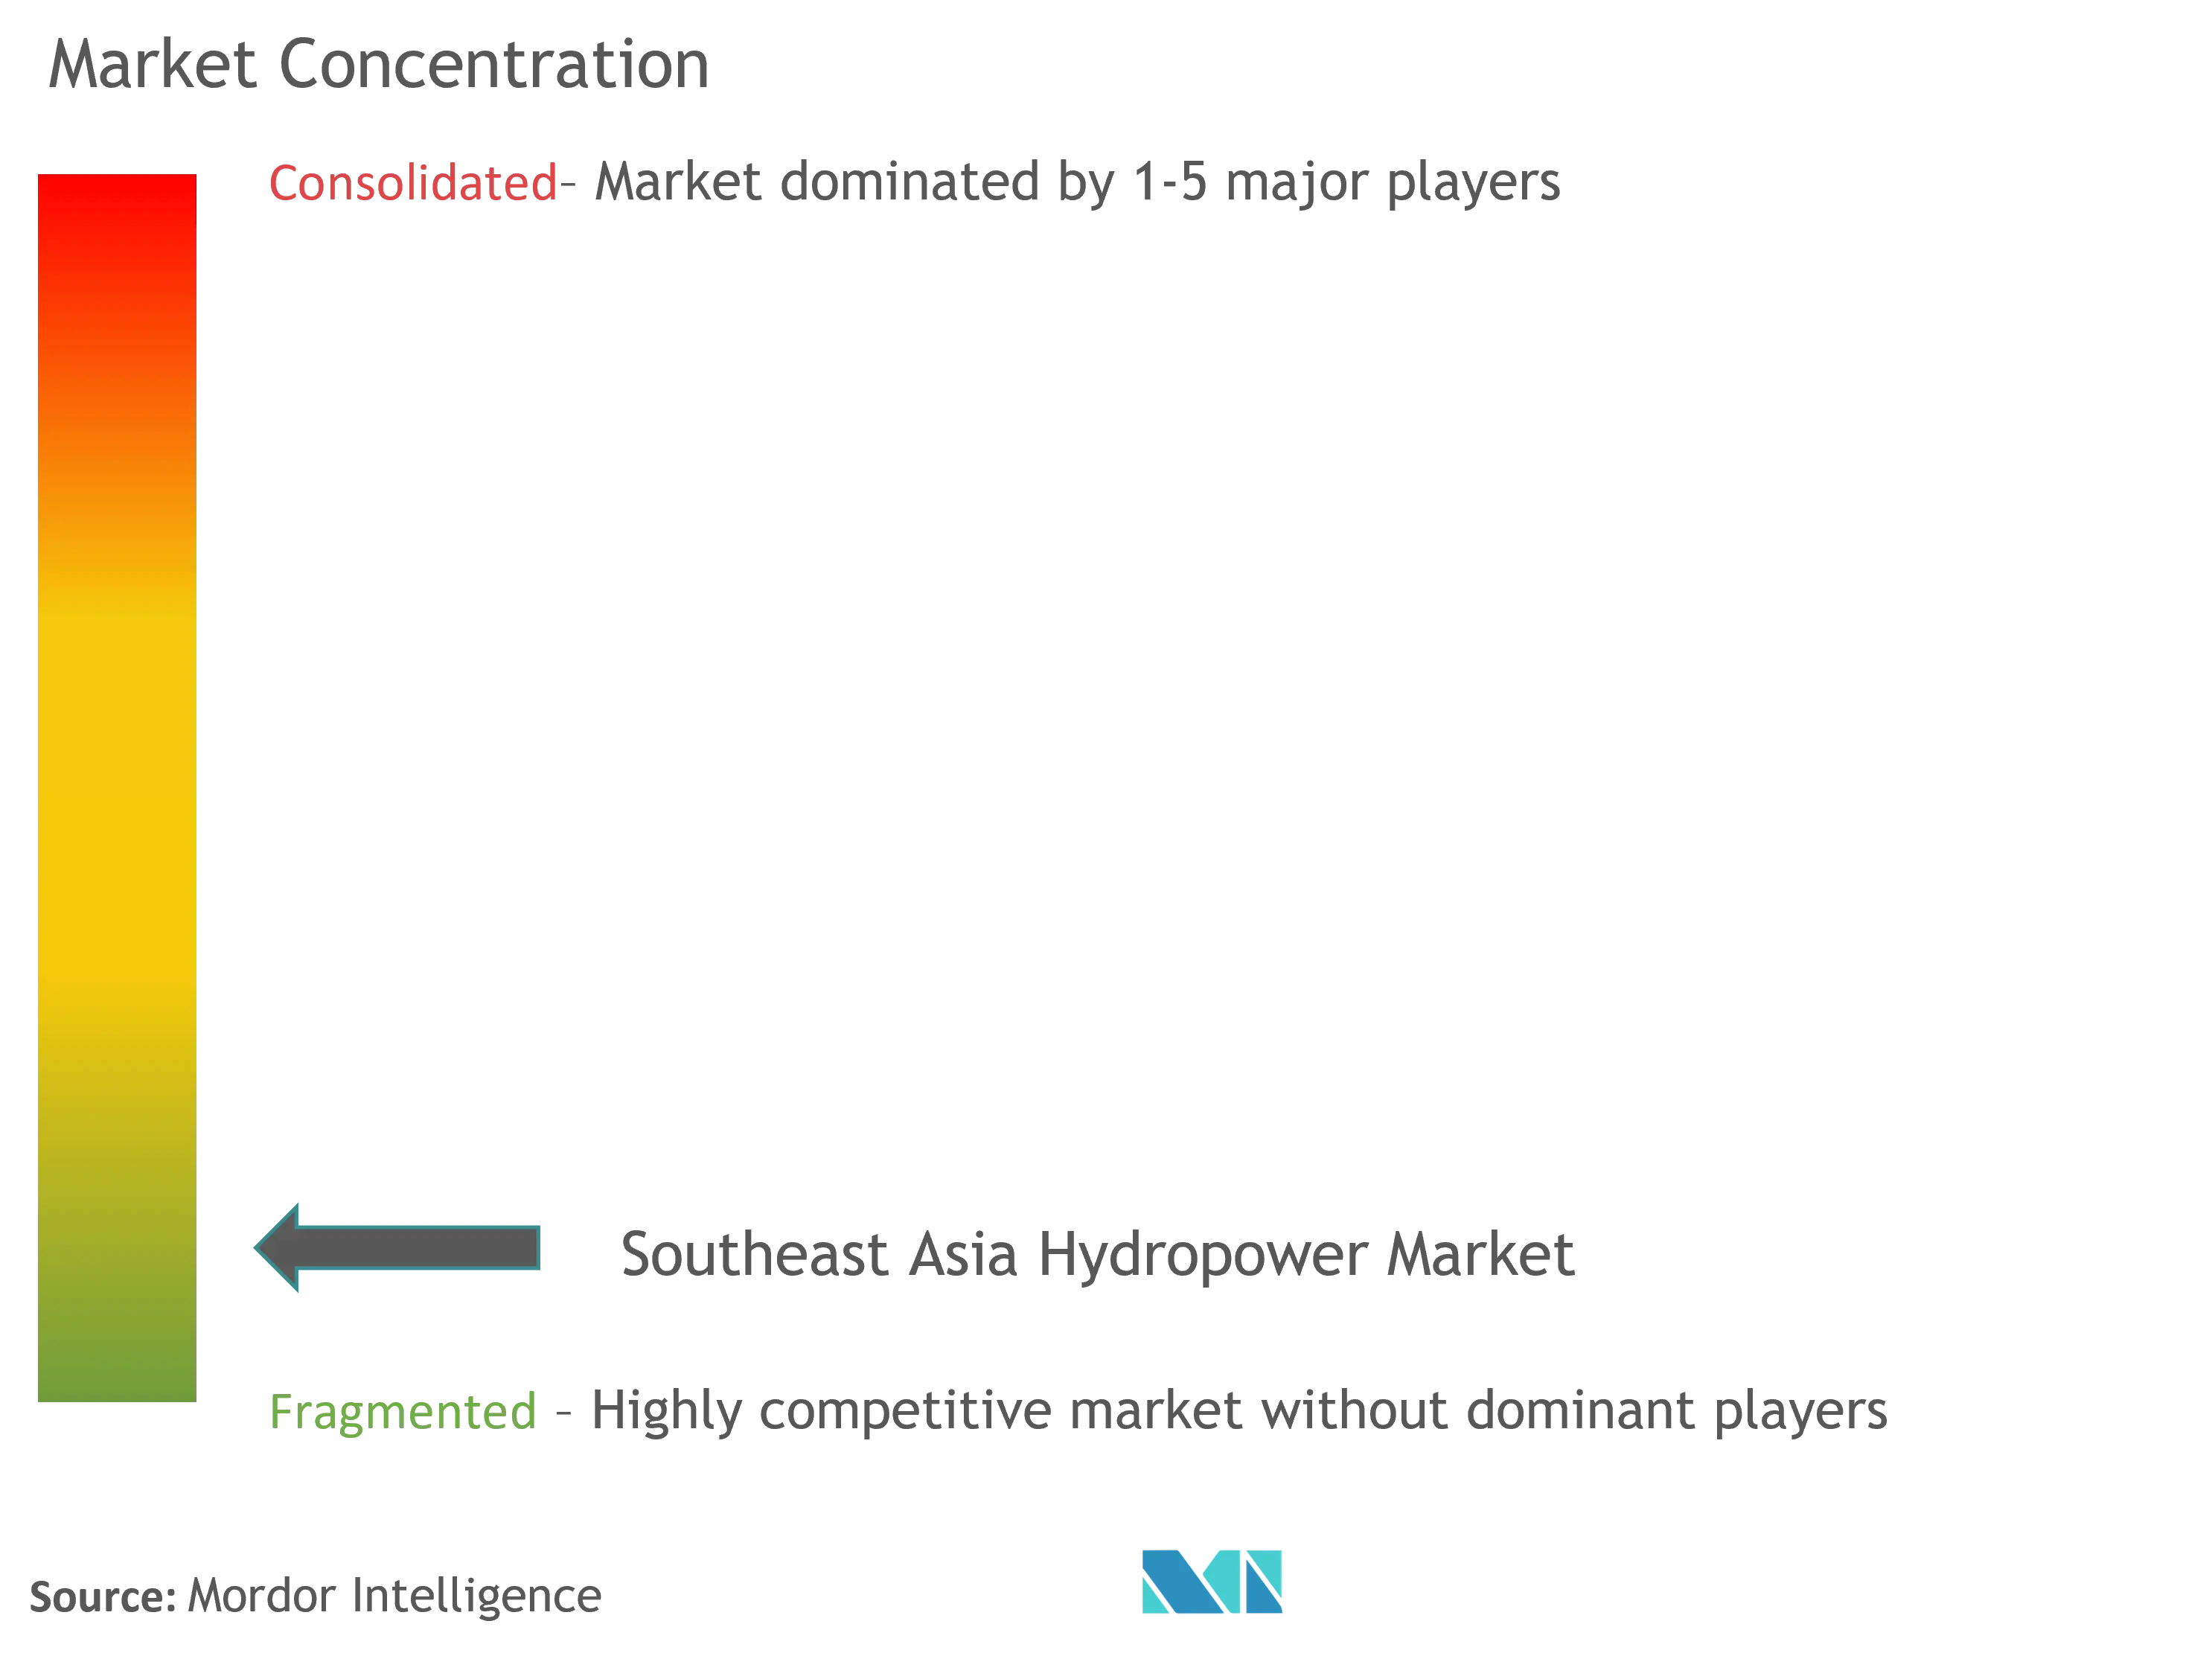 Southeast Asia Hydropower Market Concentration